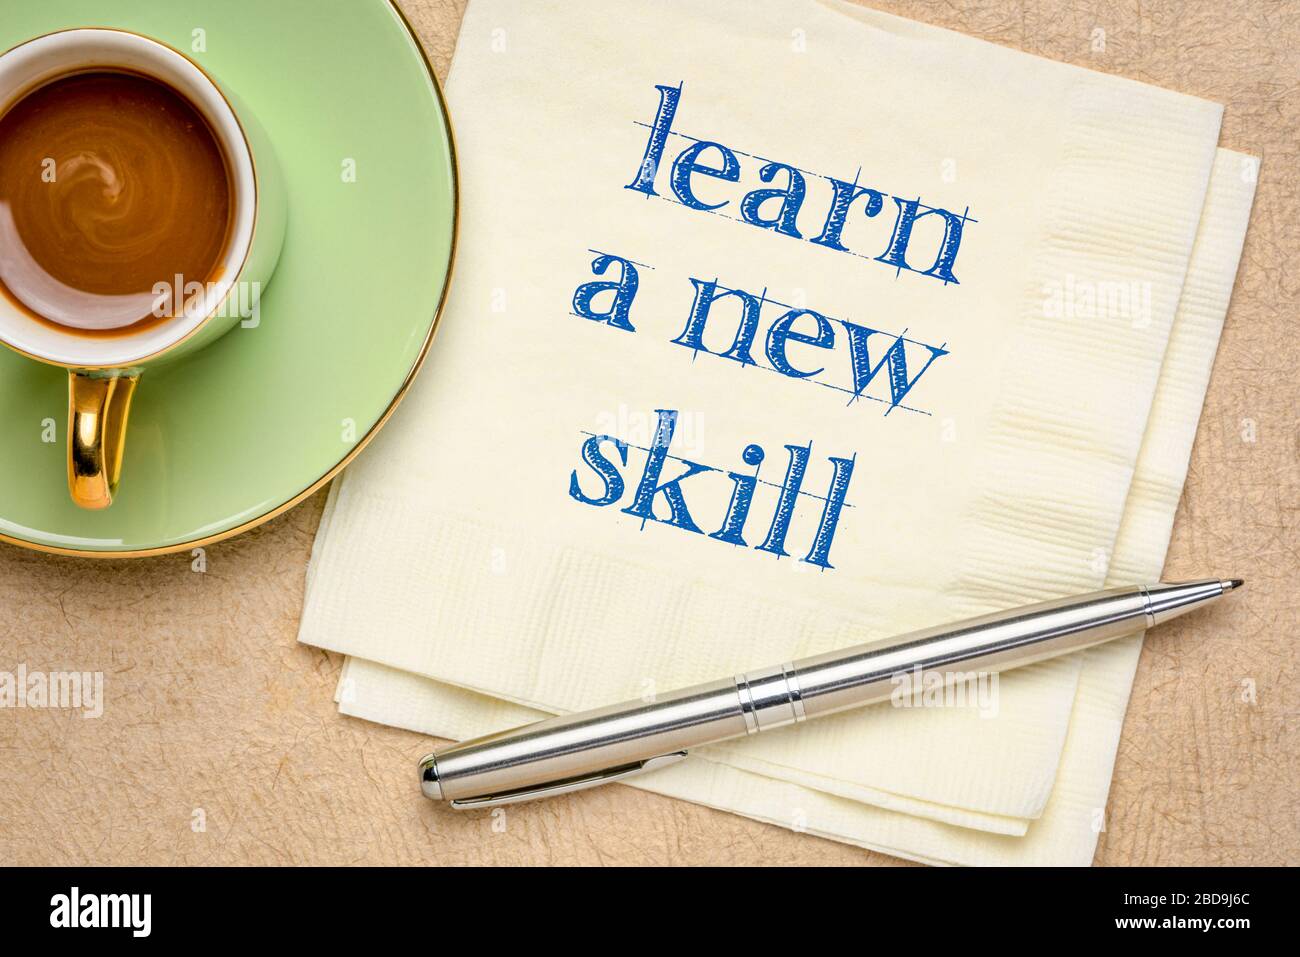 learn a new skill motivational note - handwriting on a napkin with a cup of coffee, personal development and growth concept Stock Photo